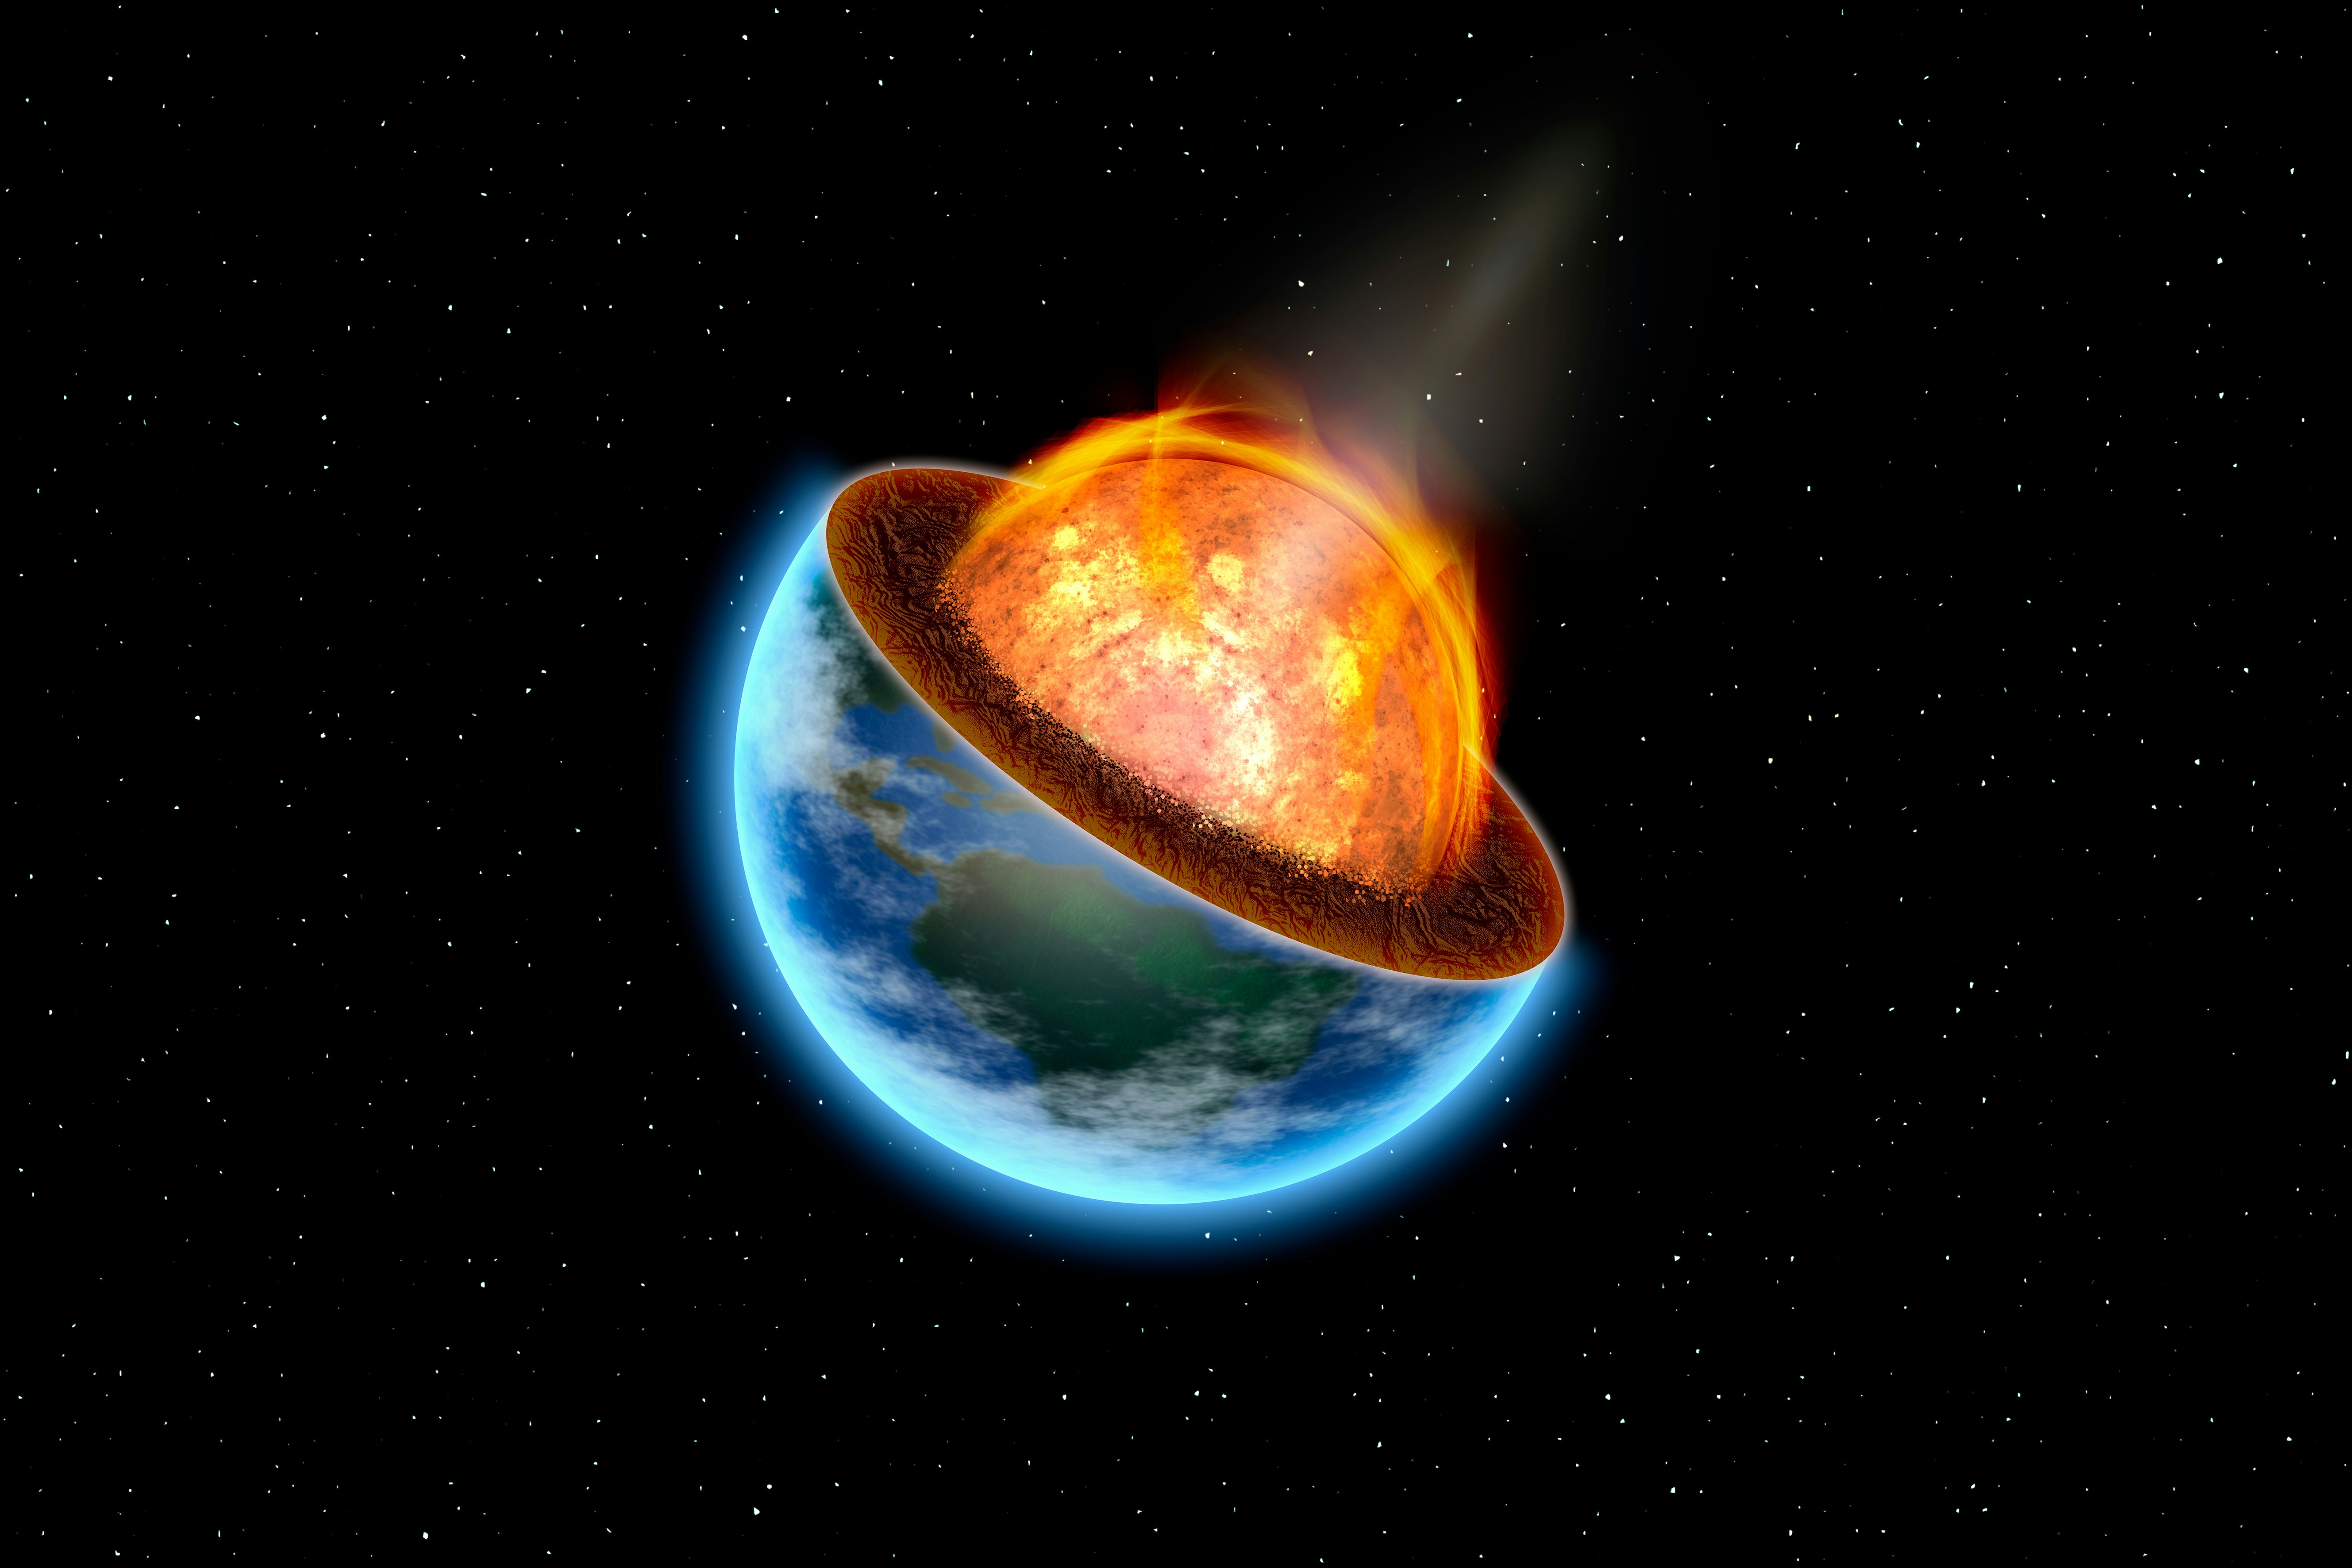 Earth's inner core is solid, seismic waves reveal